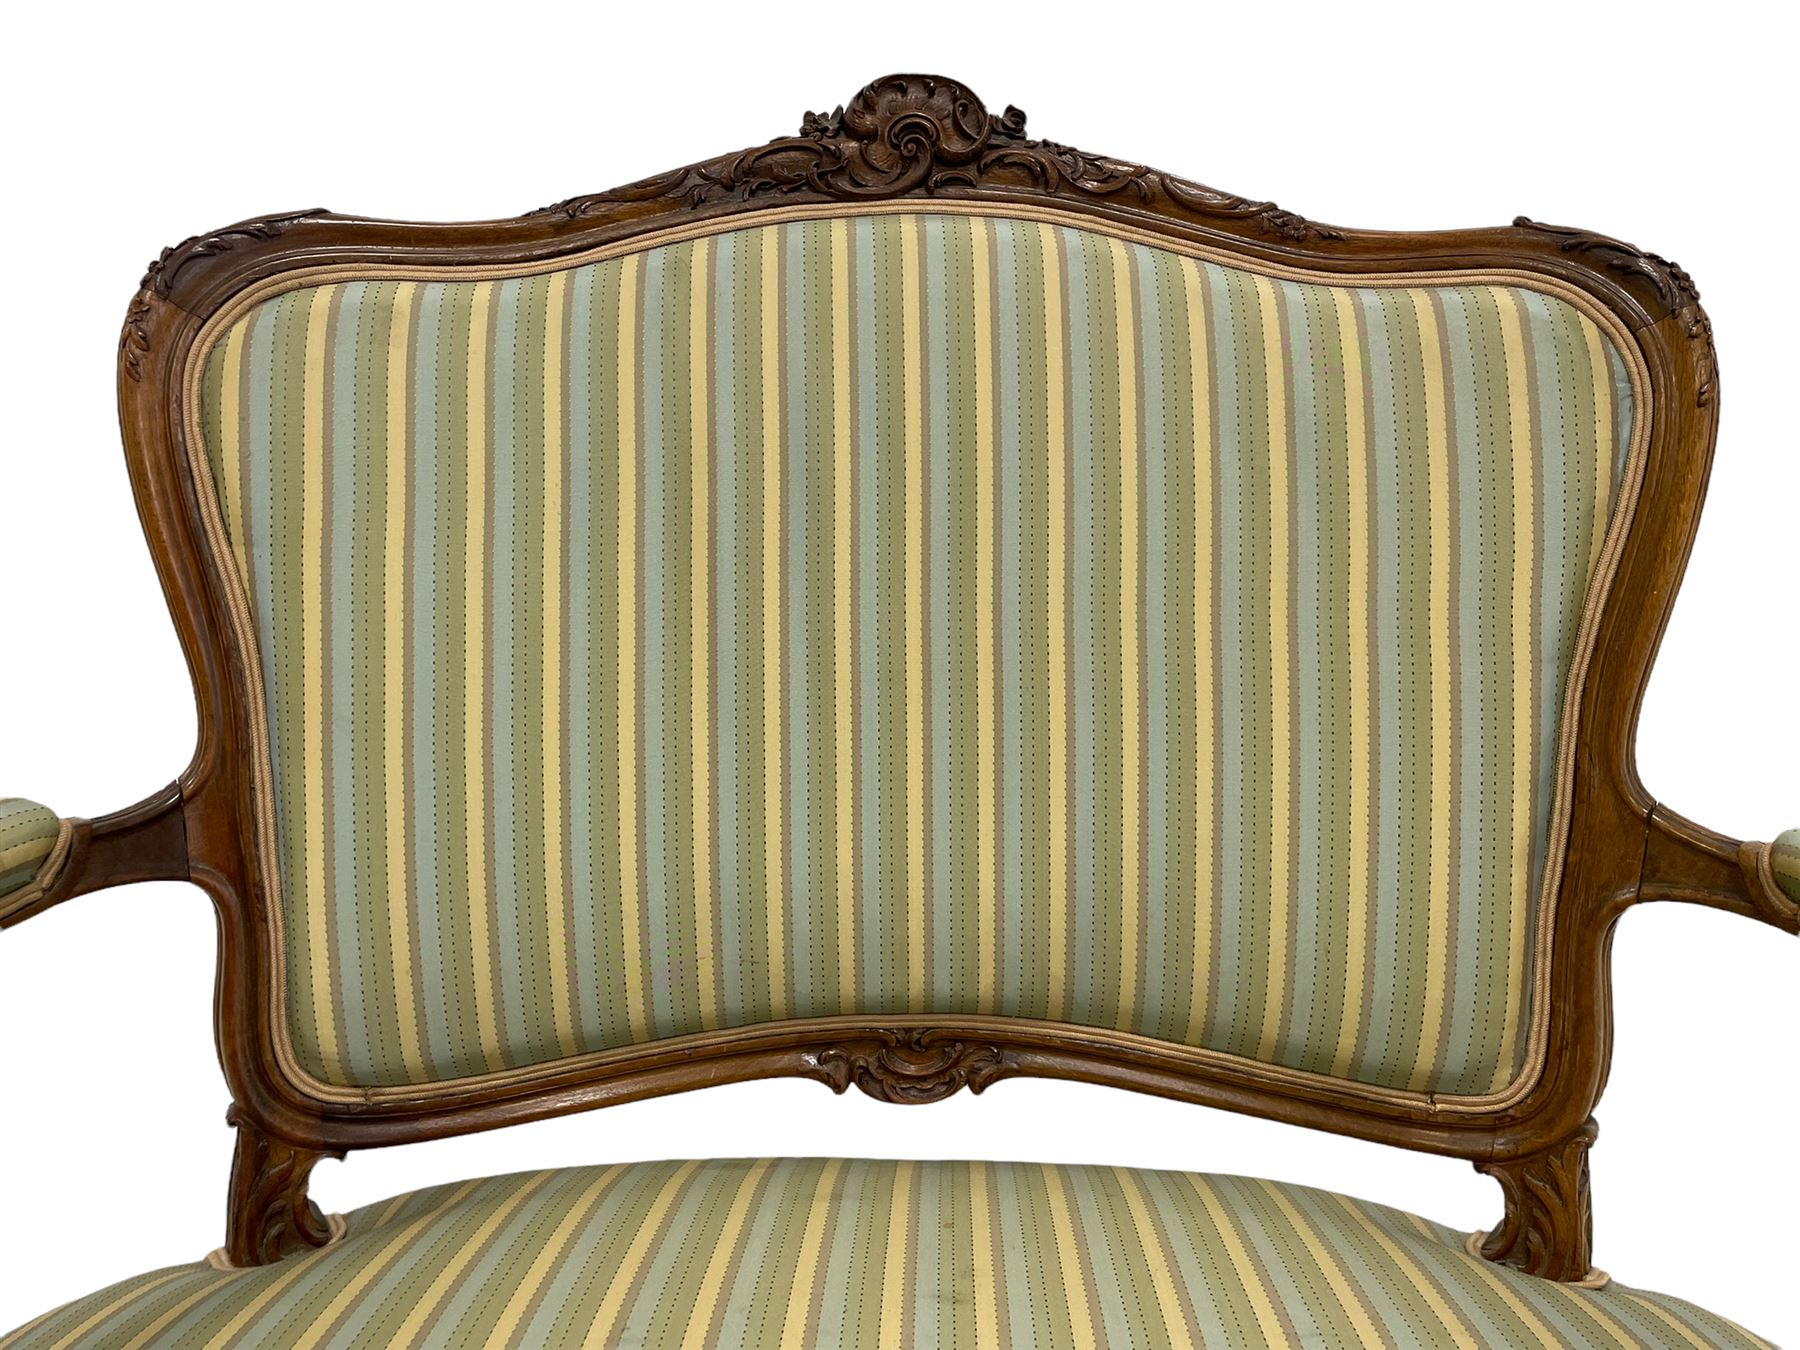 Late 20th century French walnut settee - Image 8 of 8